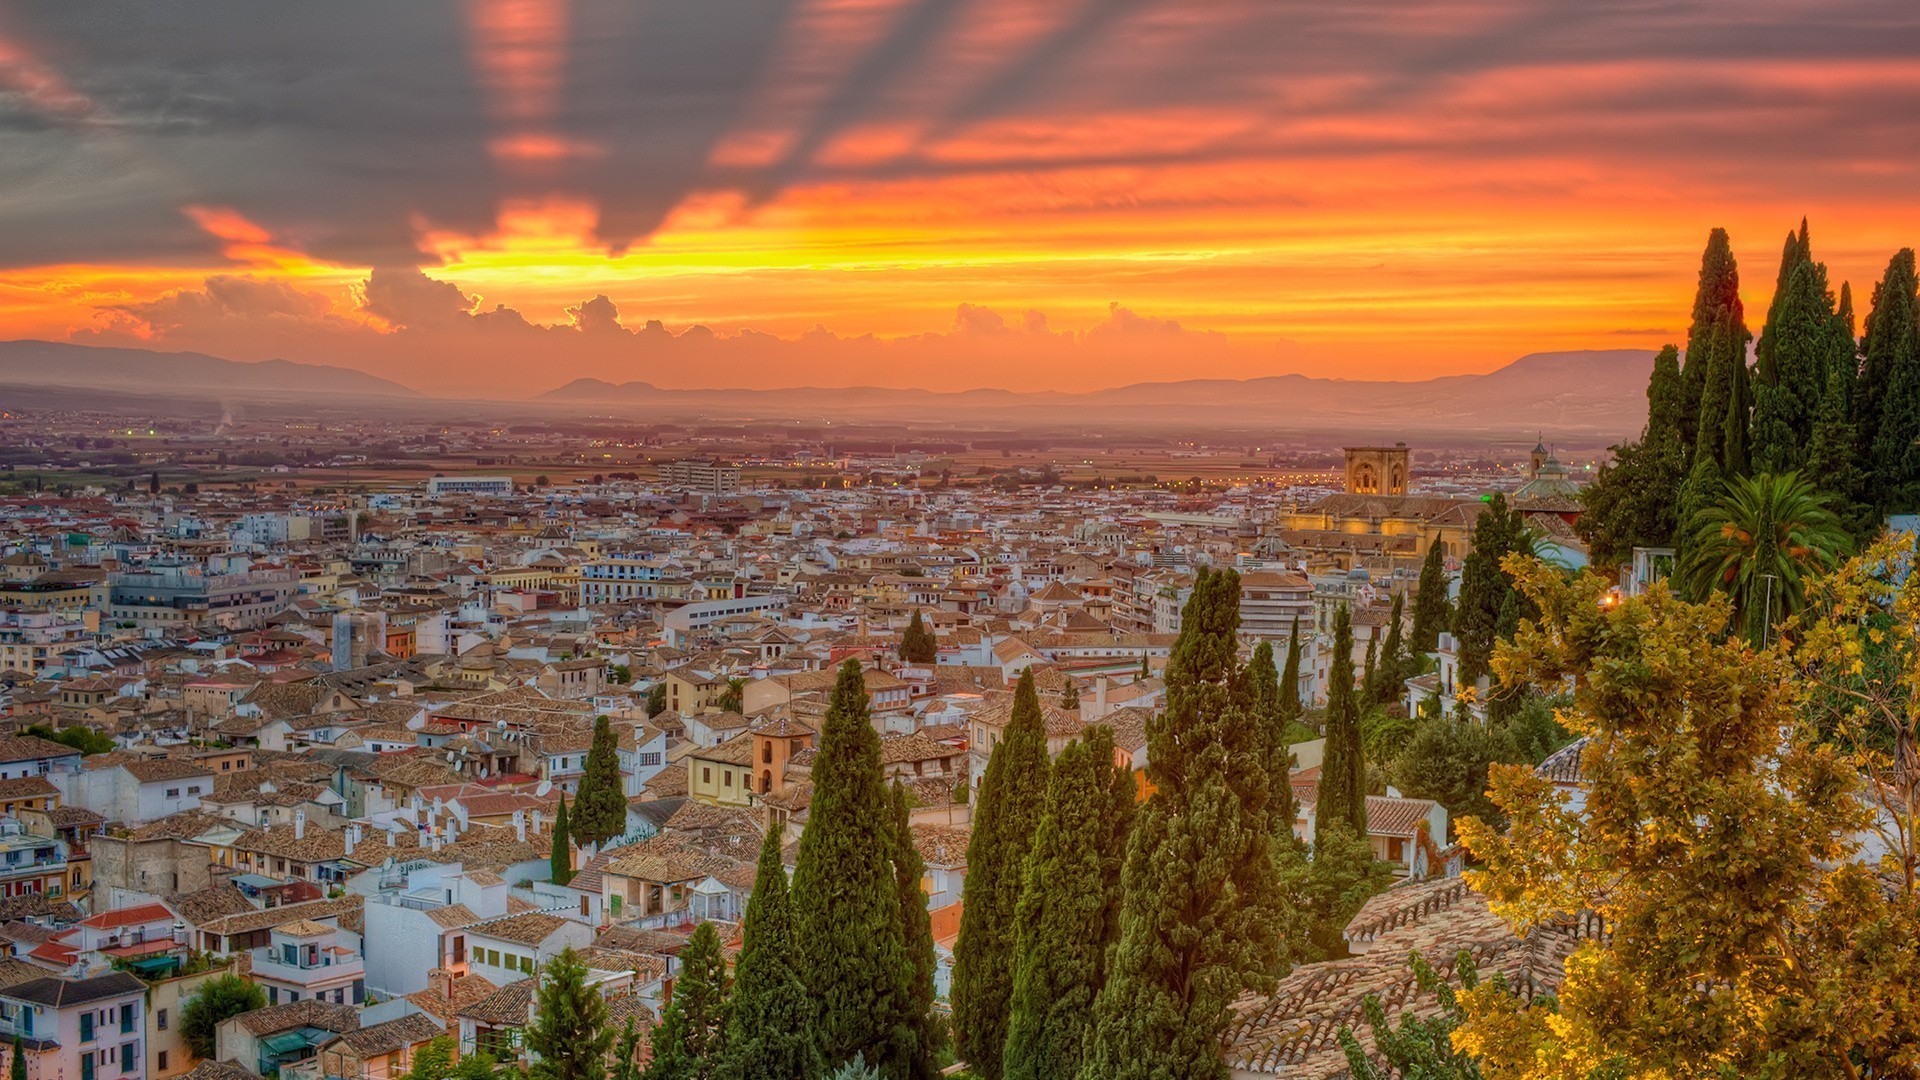 1920x1080 Spain cityscapes nature sunset trees wallpaper